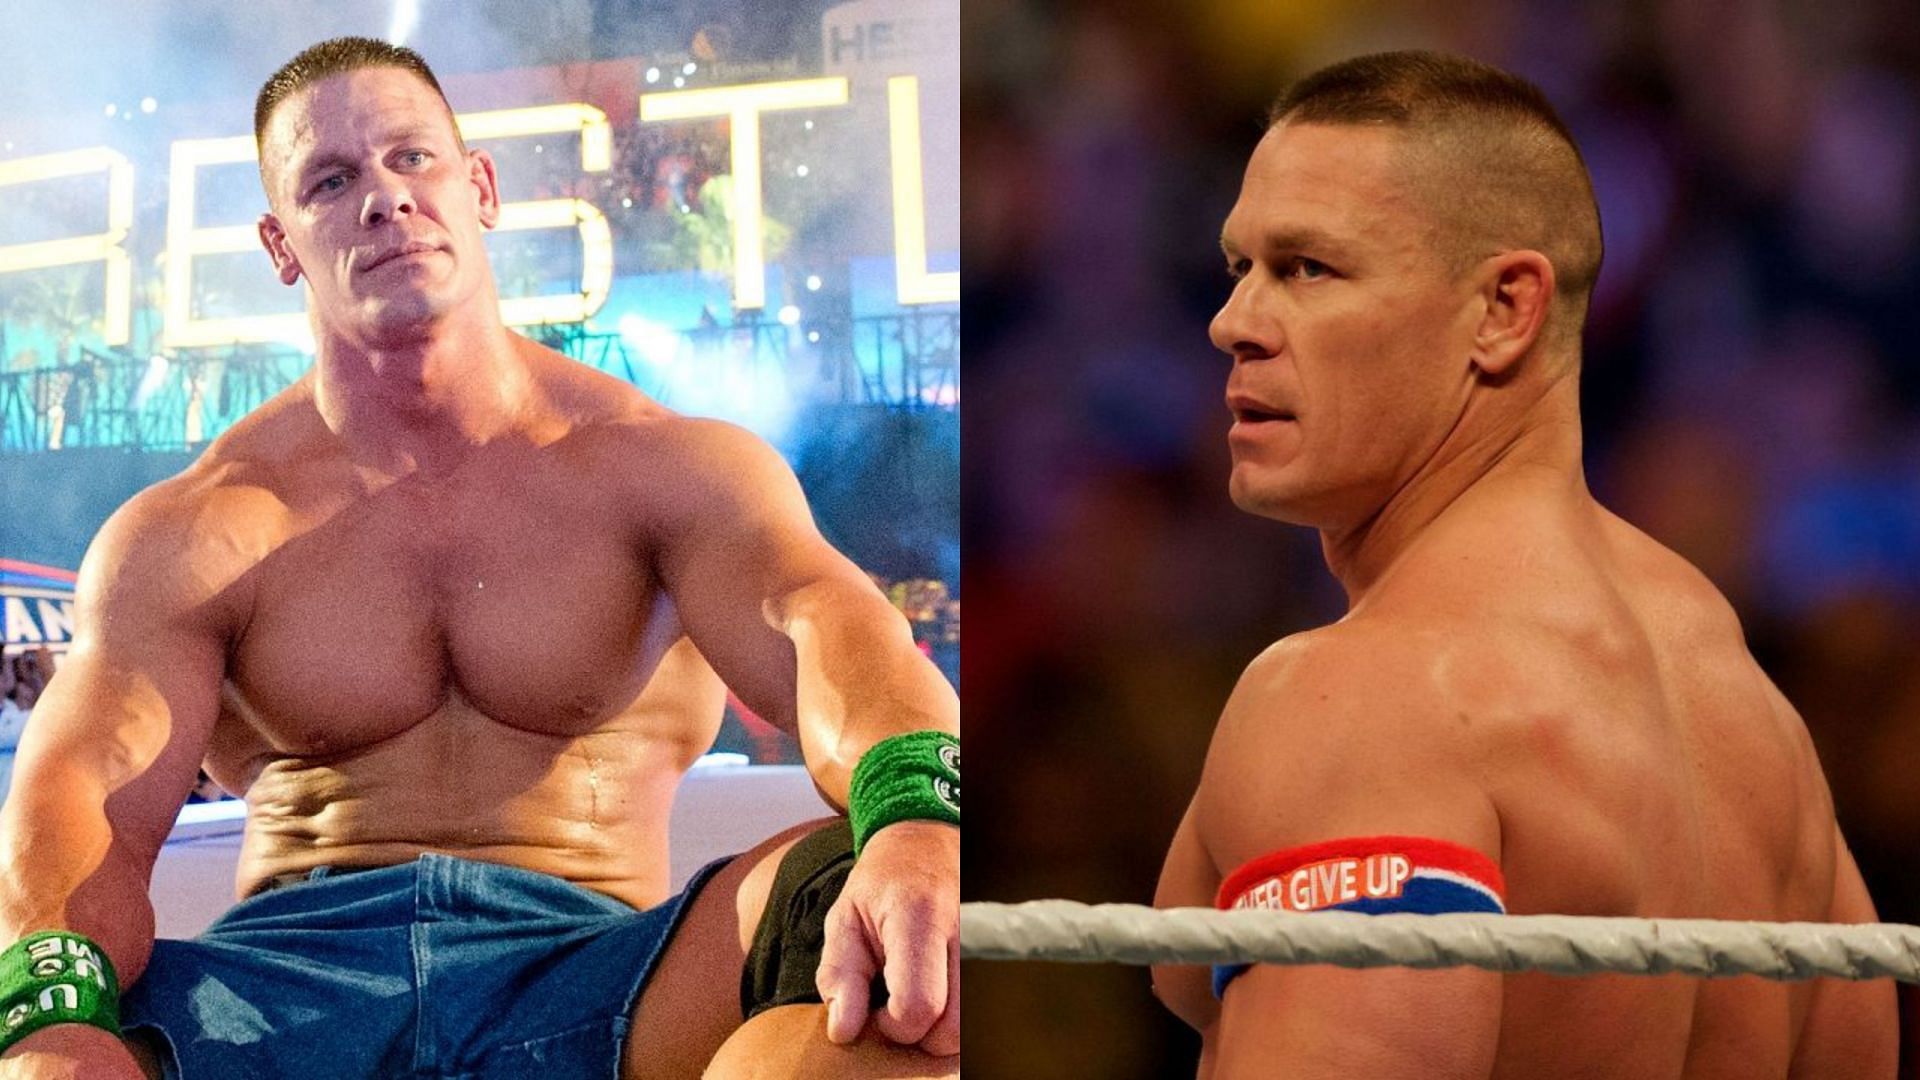 John Cena and Triple H shared the ring several times in WWE